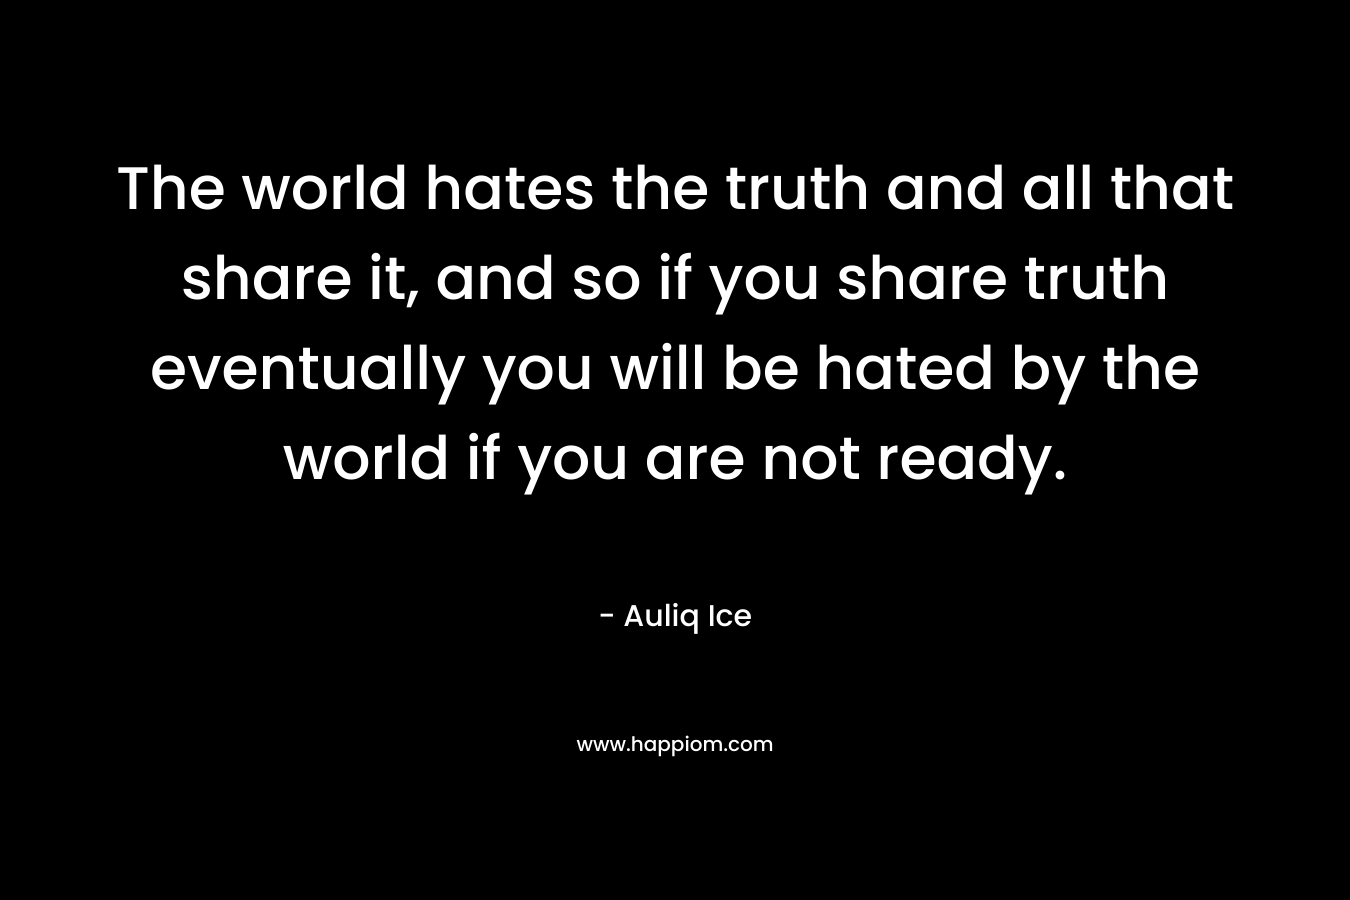 The world hates the truth and all that share it, and so if you share truth eventually you will be hated by the world if you are not ready. – Auliq Ice